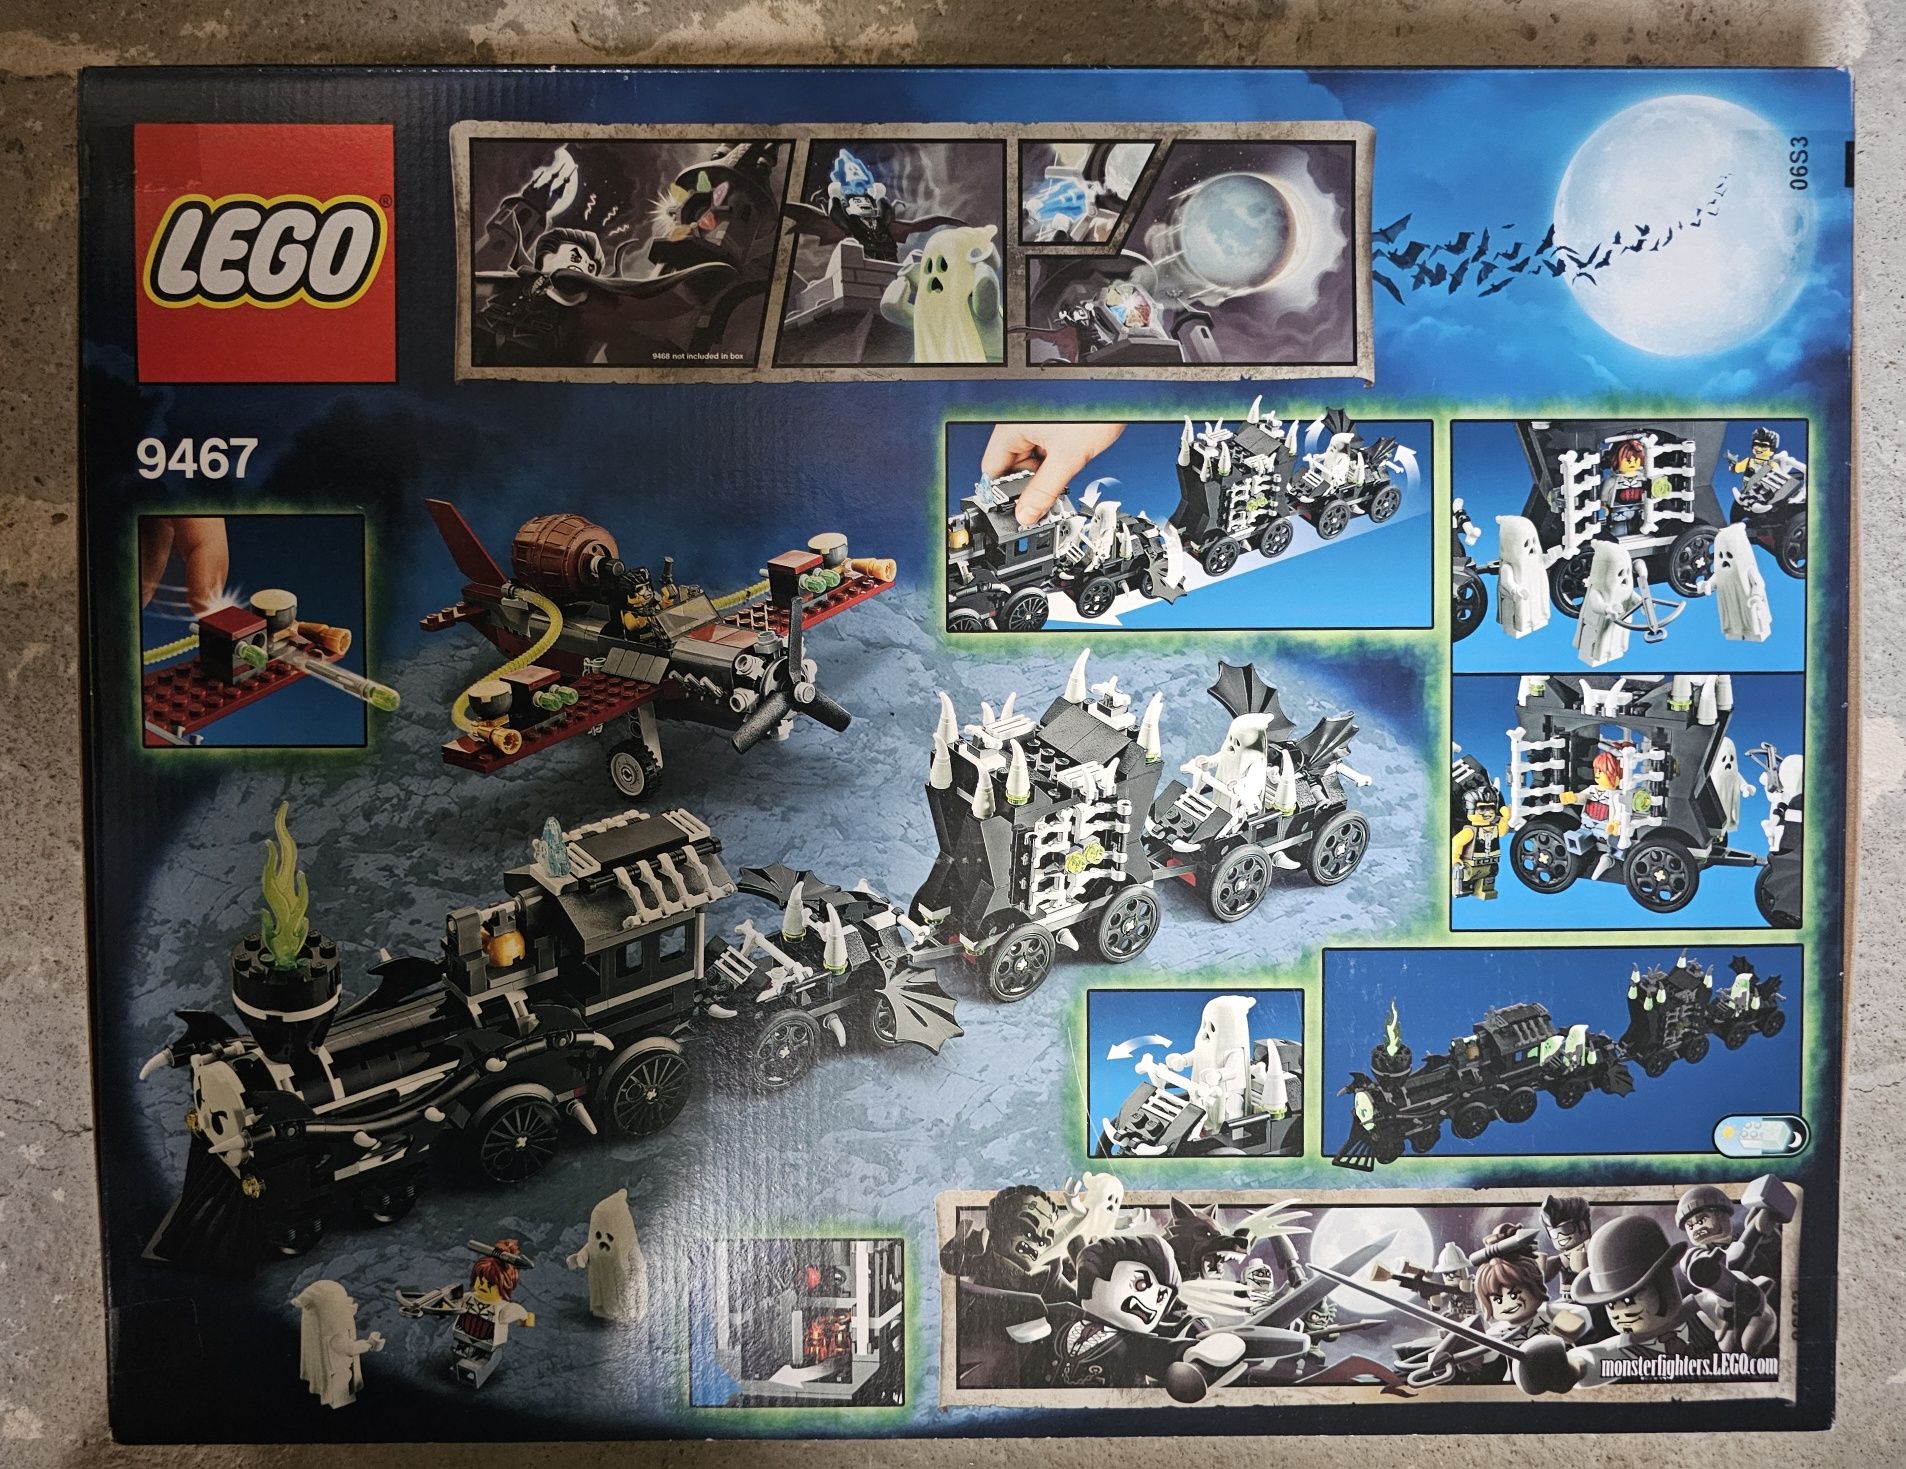 Lego 9467 Moster Fighters Pociąg widmo